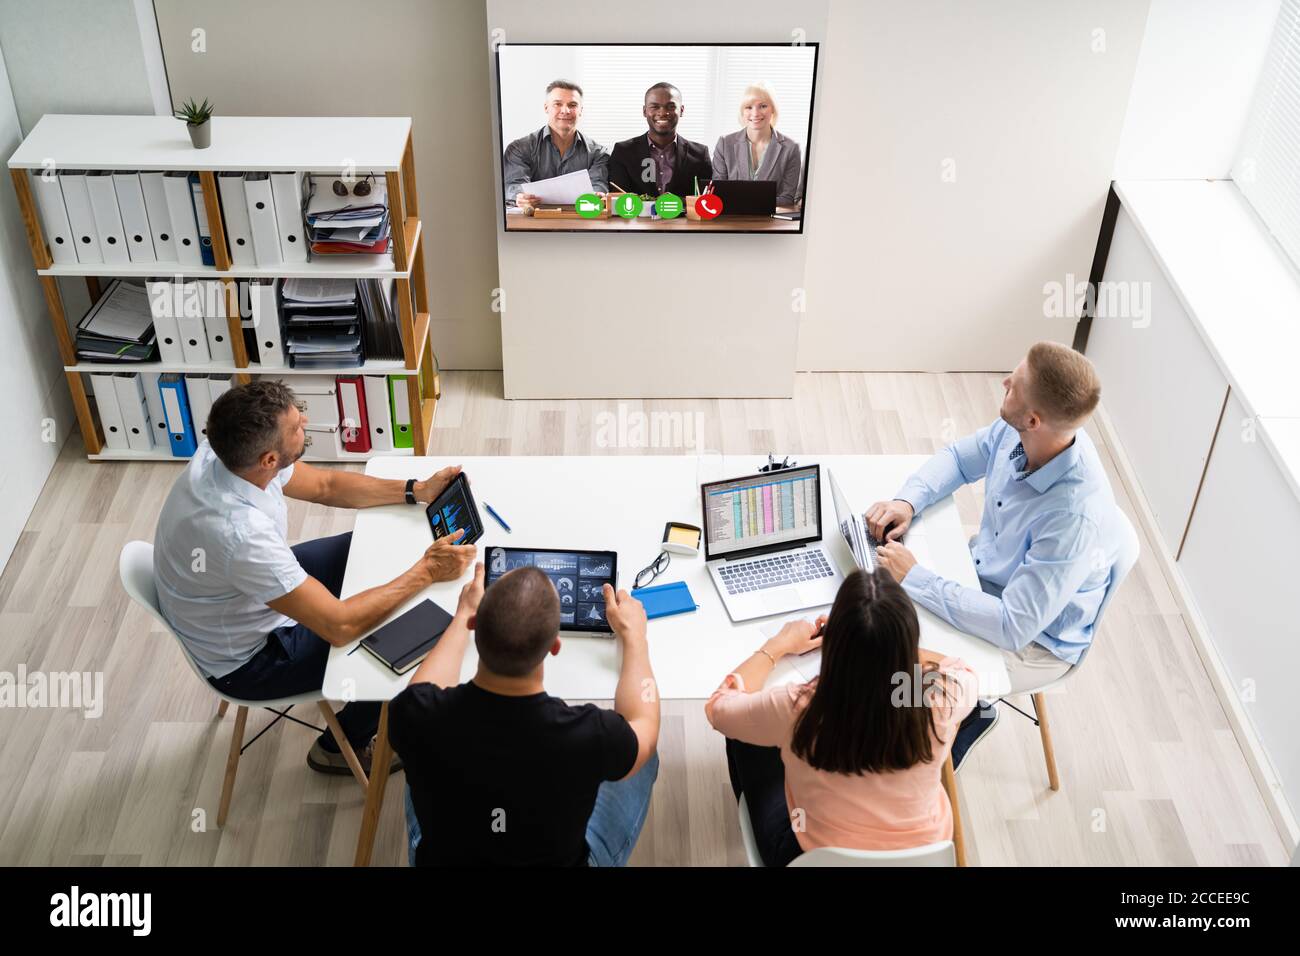 Online Video Conference Training Business Meeting In Office Stock Photo